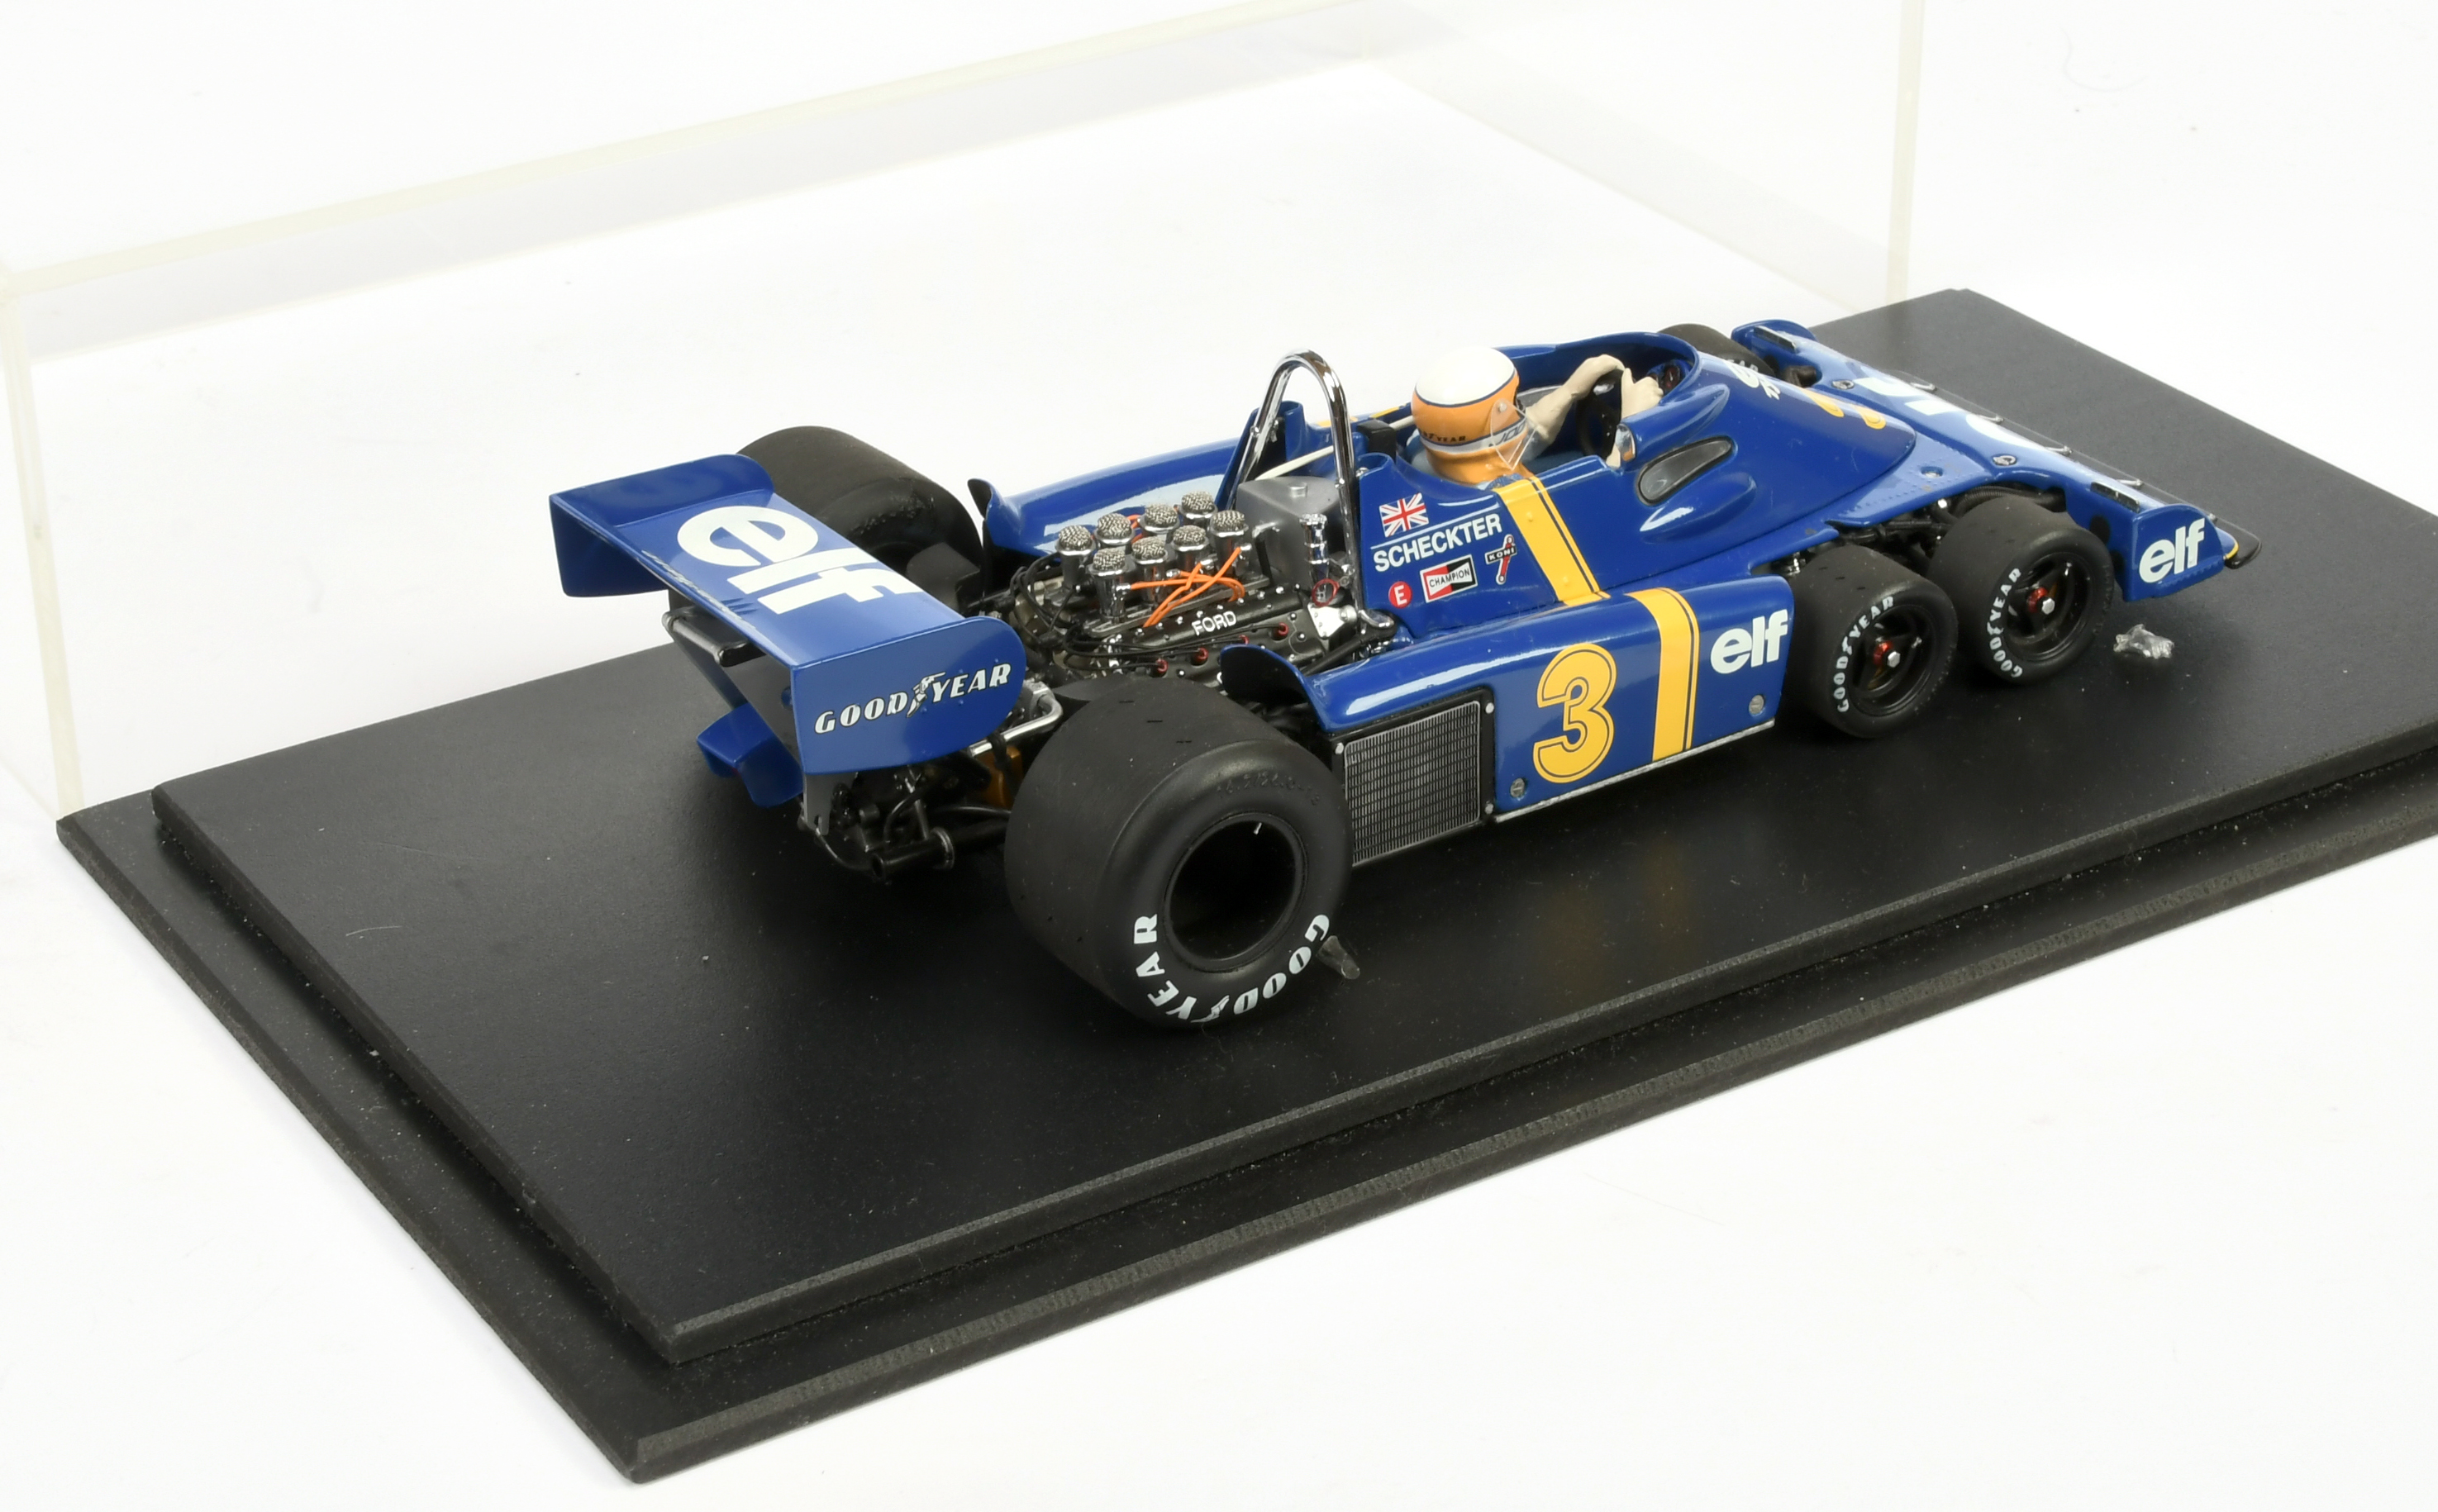 Exoto Tyrrell Ford 1/18 scale model racing car, Scheckter, racing number 3 - Image 2 of 3